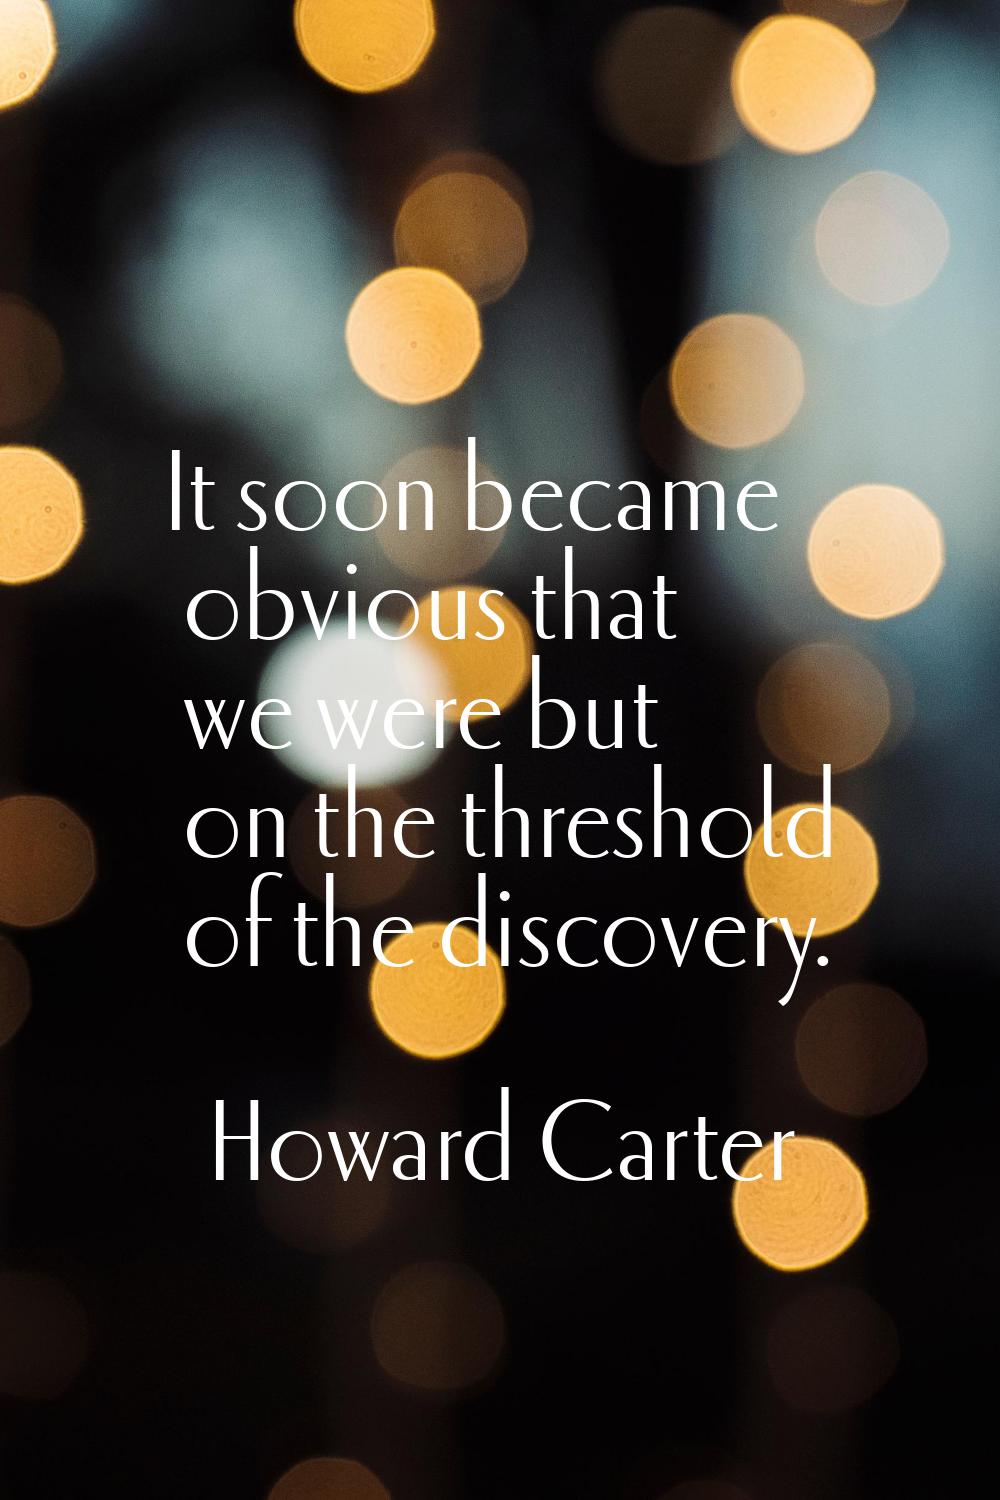 It soon became obvious that we were but on the threshold of the discovery.